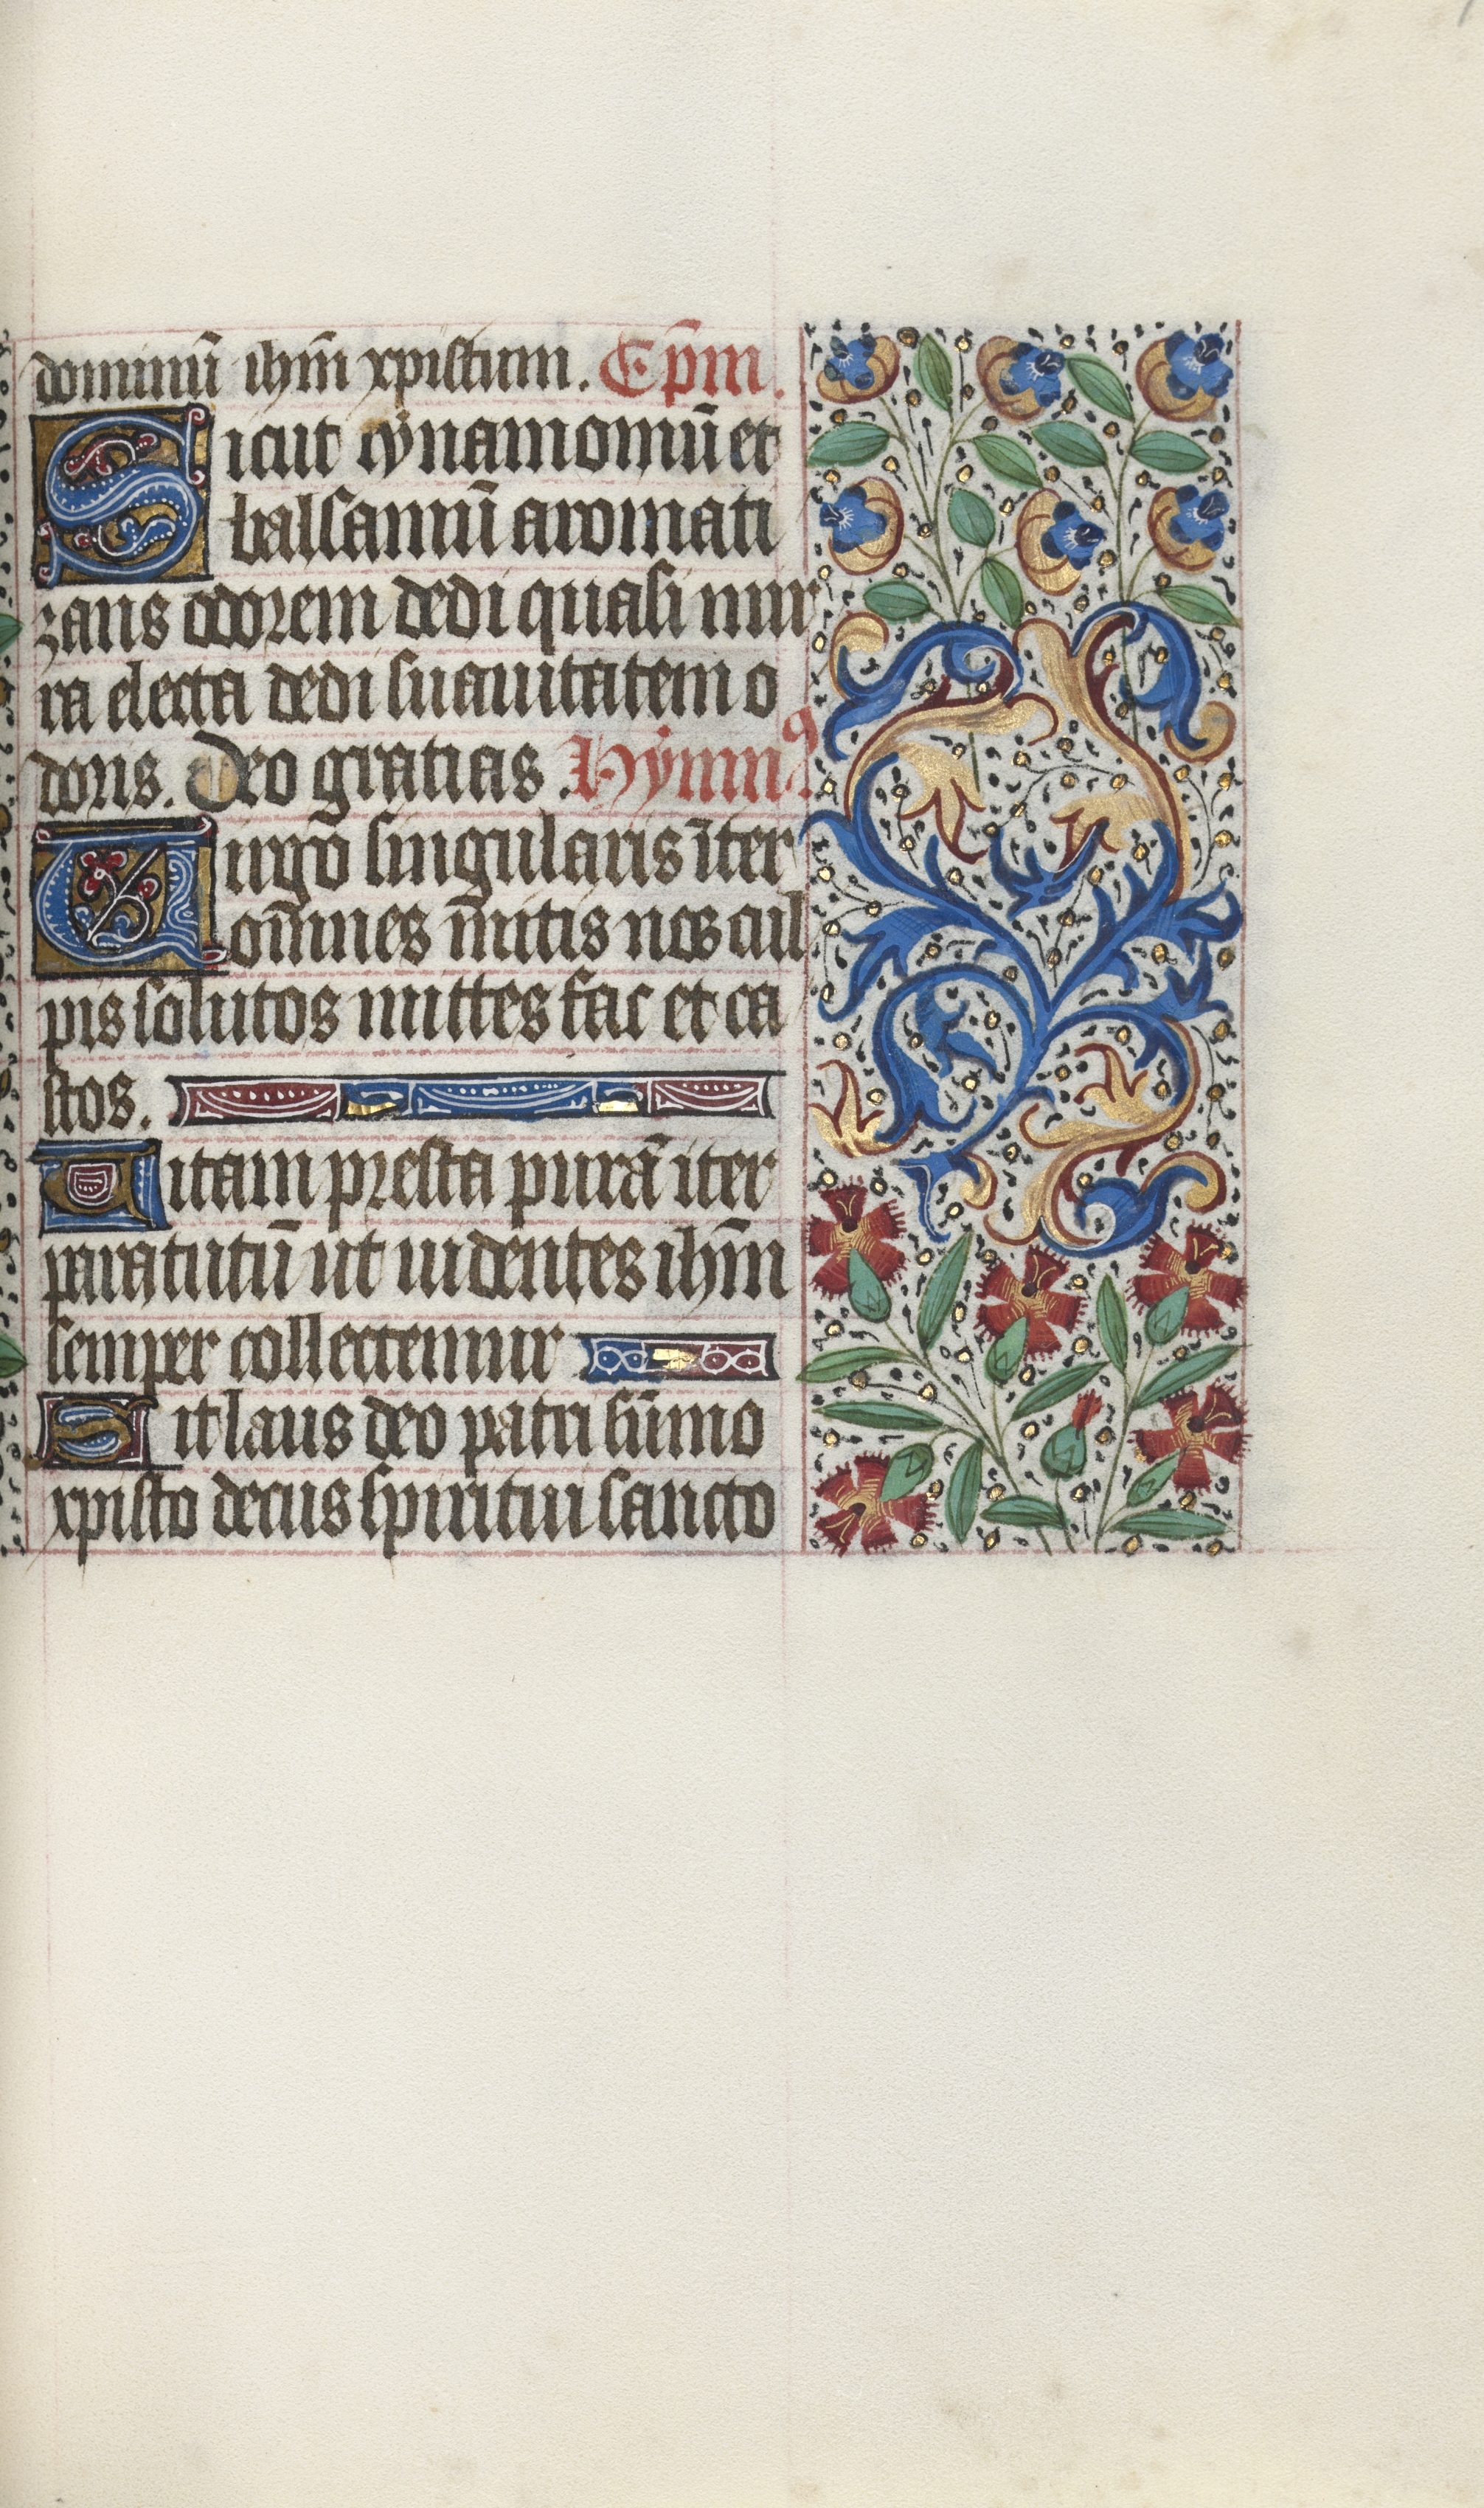 Book of Hours (Use of Rouen): fol. 78r